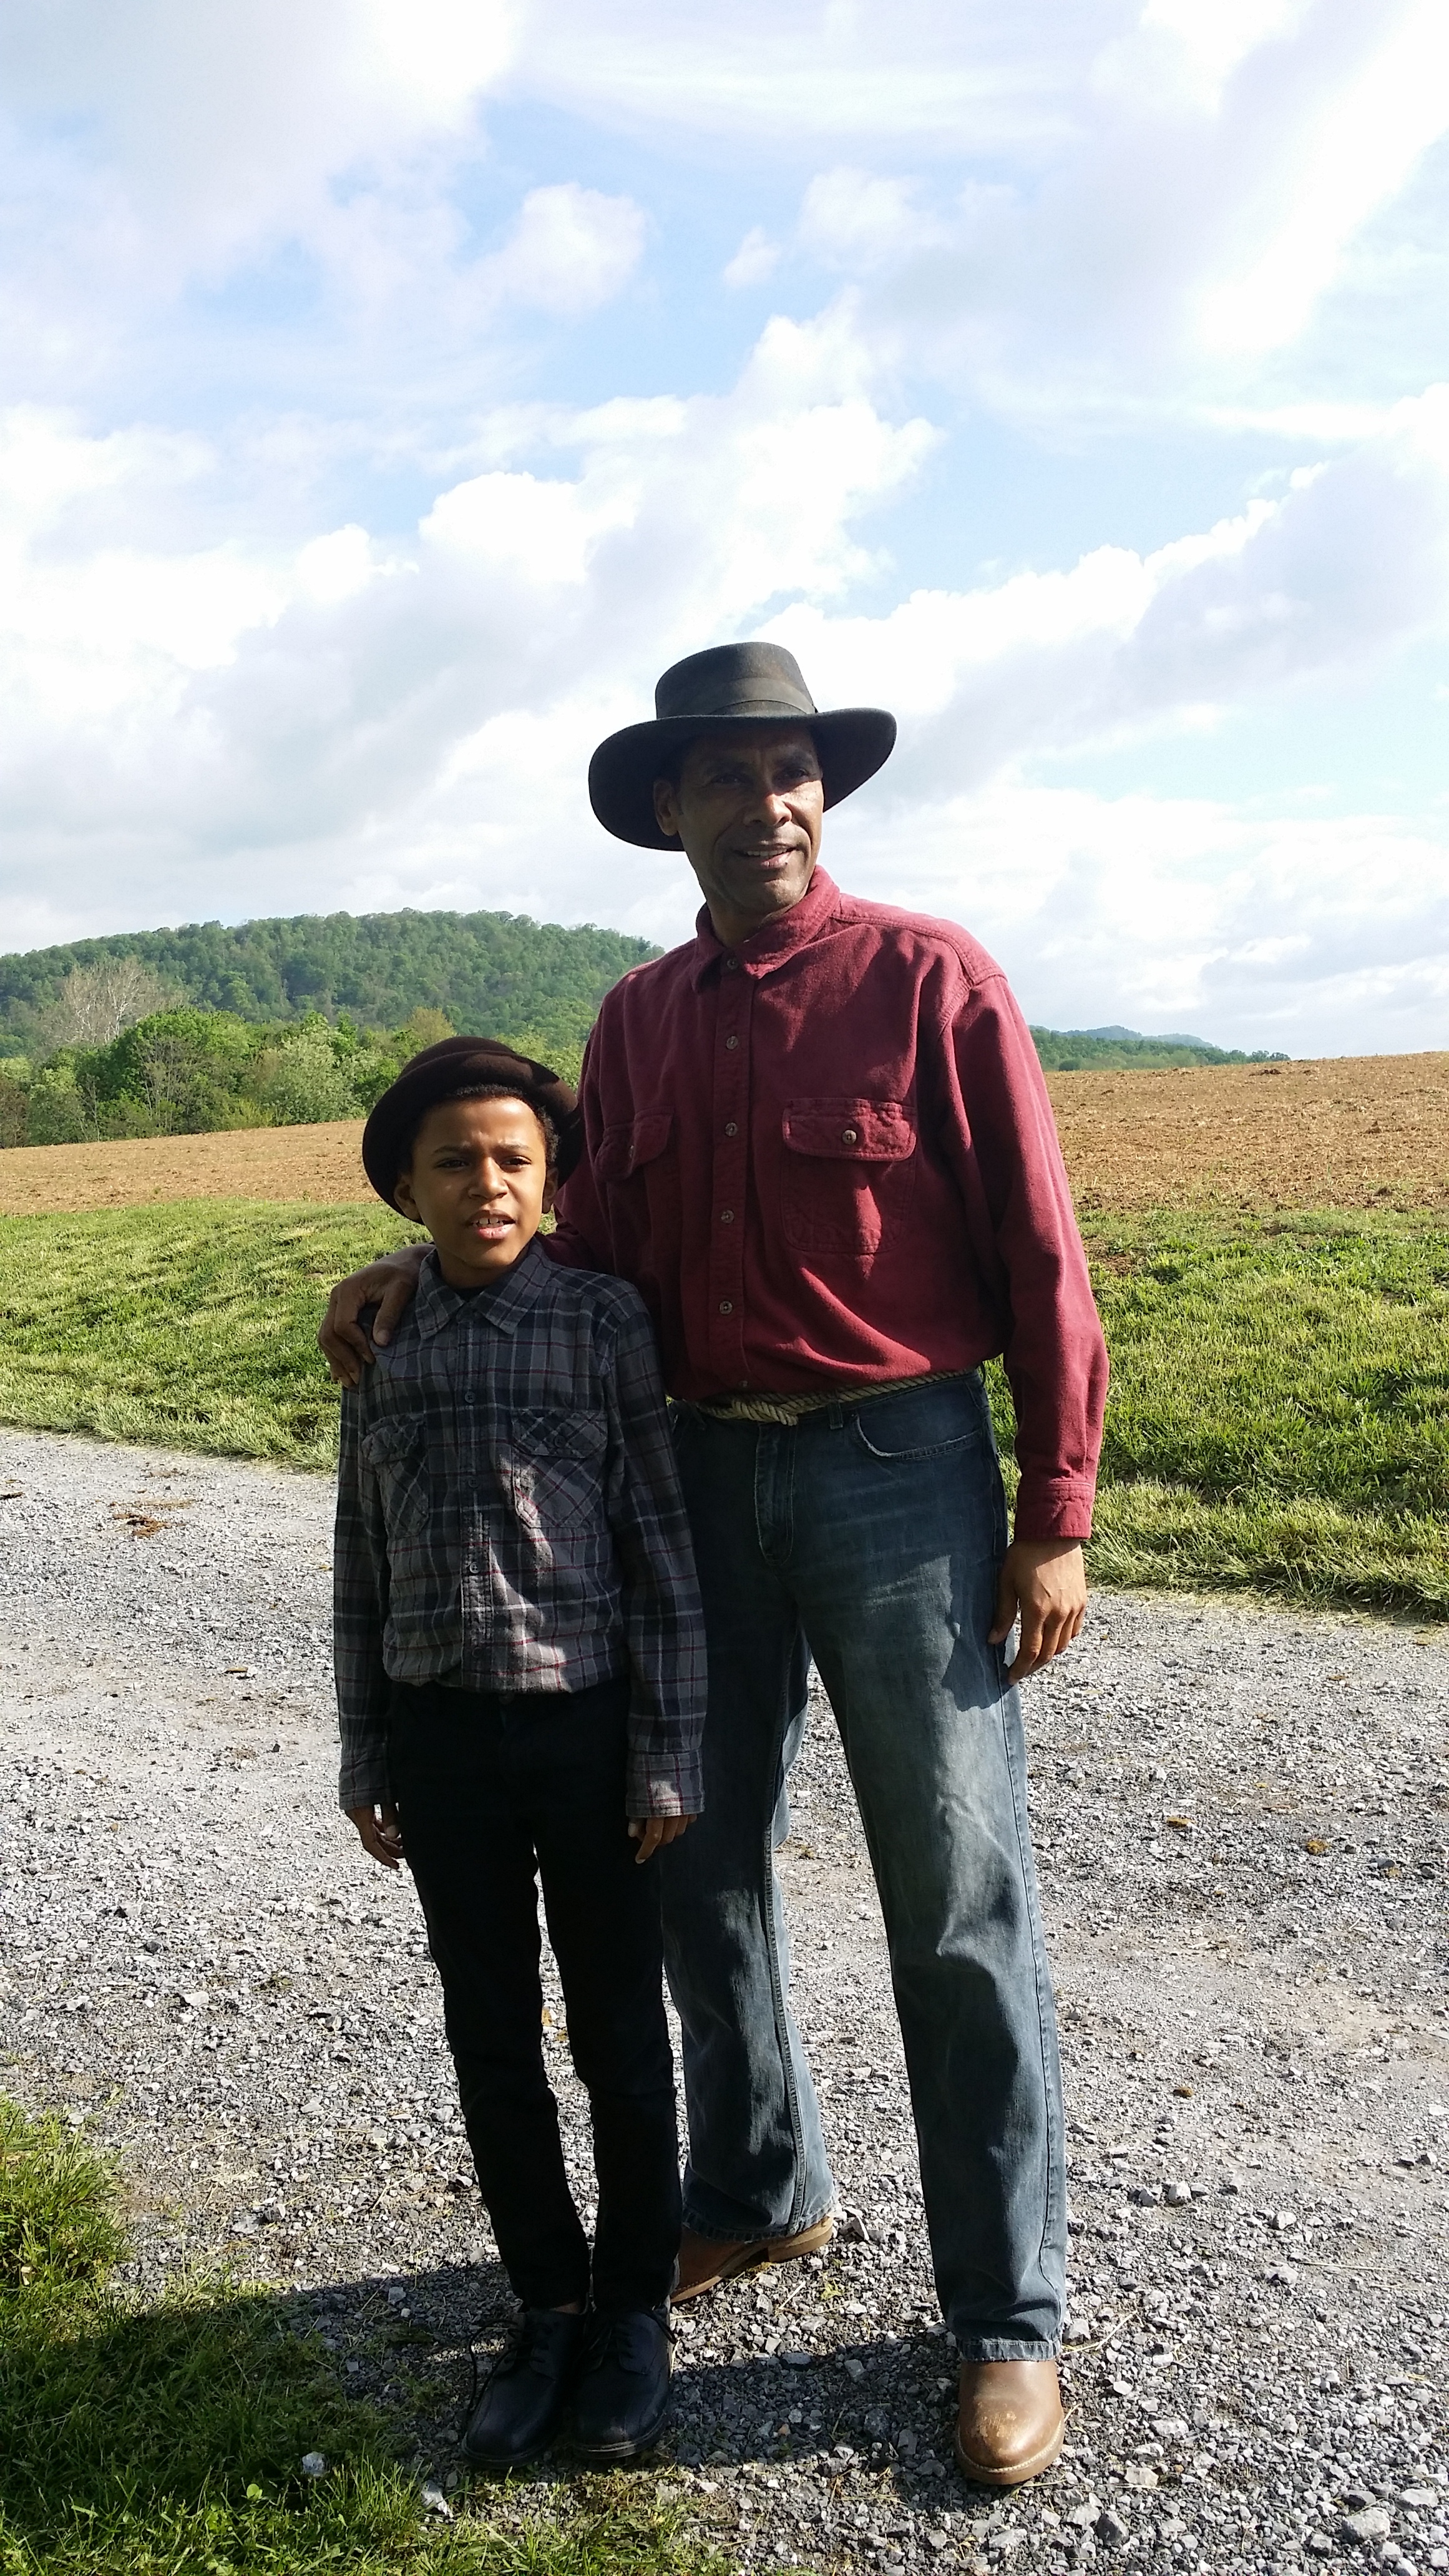 Actor Lamont Easter playing Bill Barnaby in the 1887 Indie western feature film The Lonesome Trail - Pre-production shot.